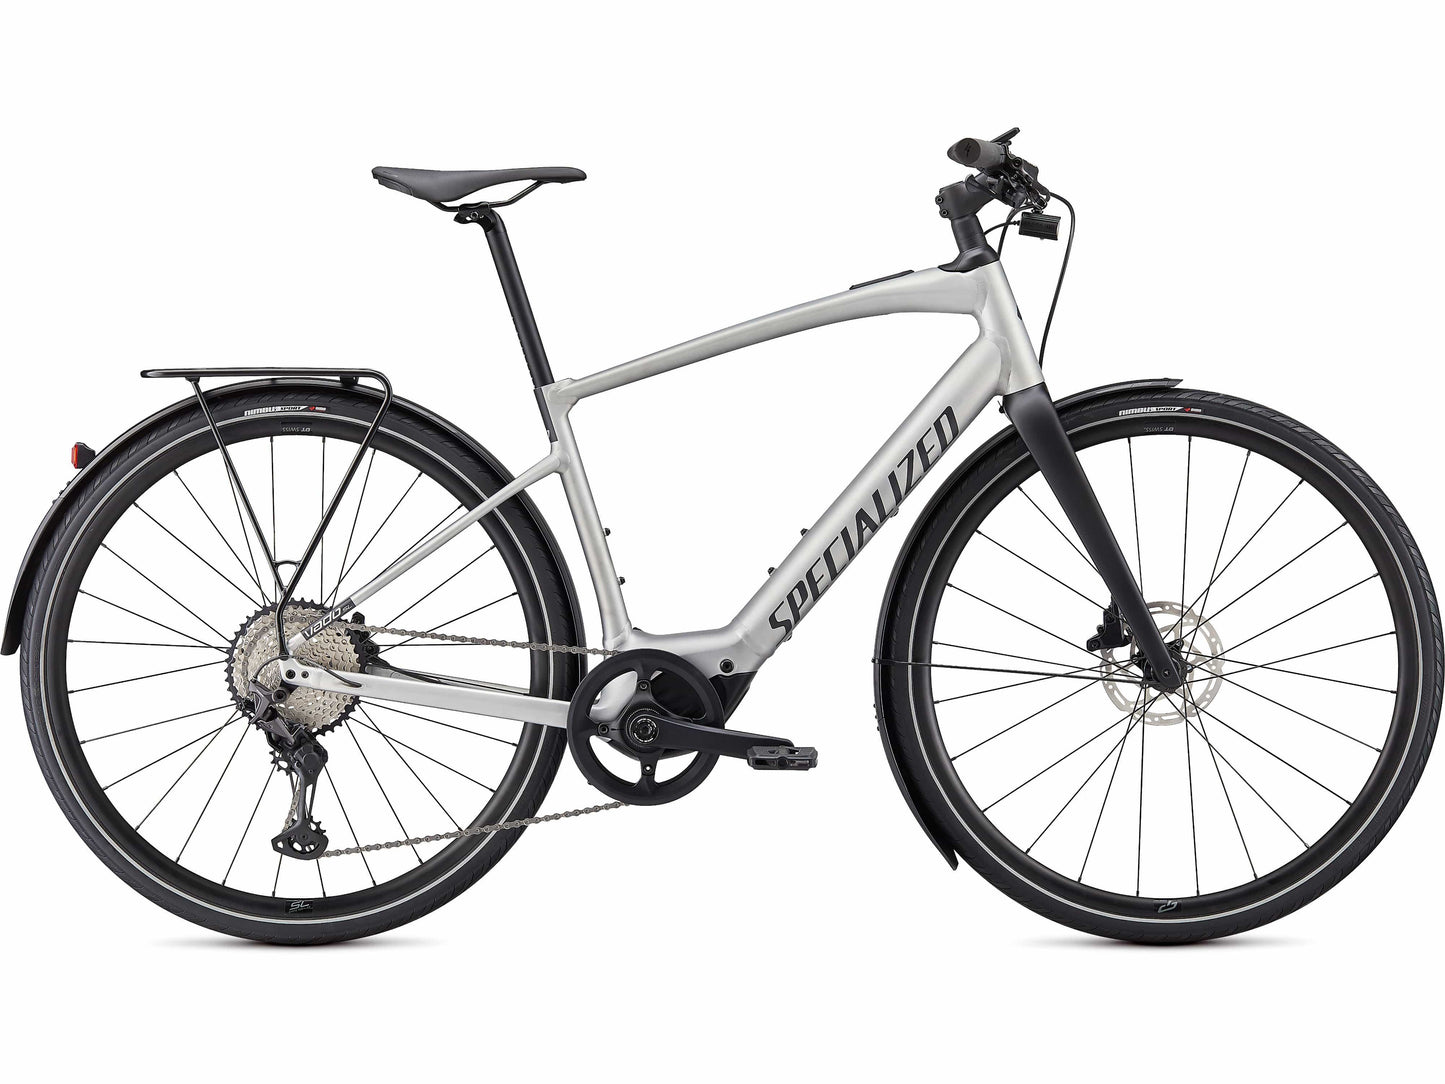 Specialized Turbo Vado SL 5.0 EQ ebike brushed aluminum side view on Fly Rides